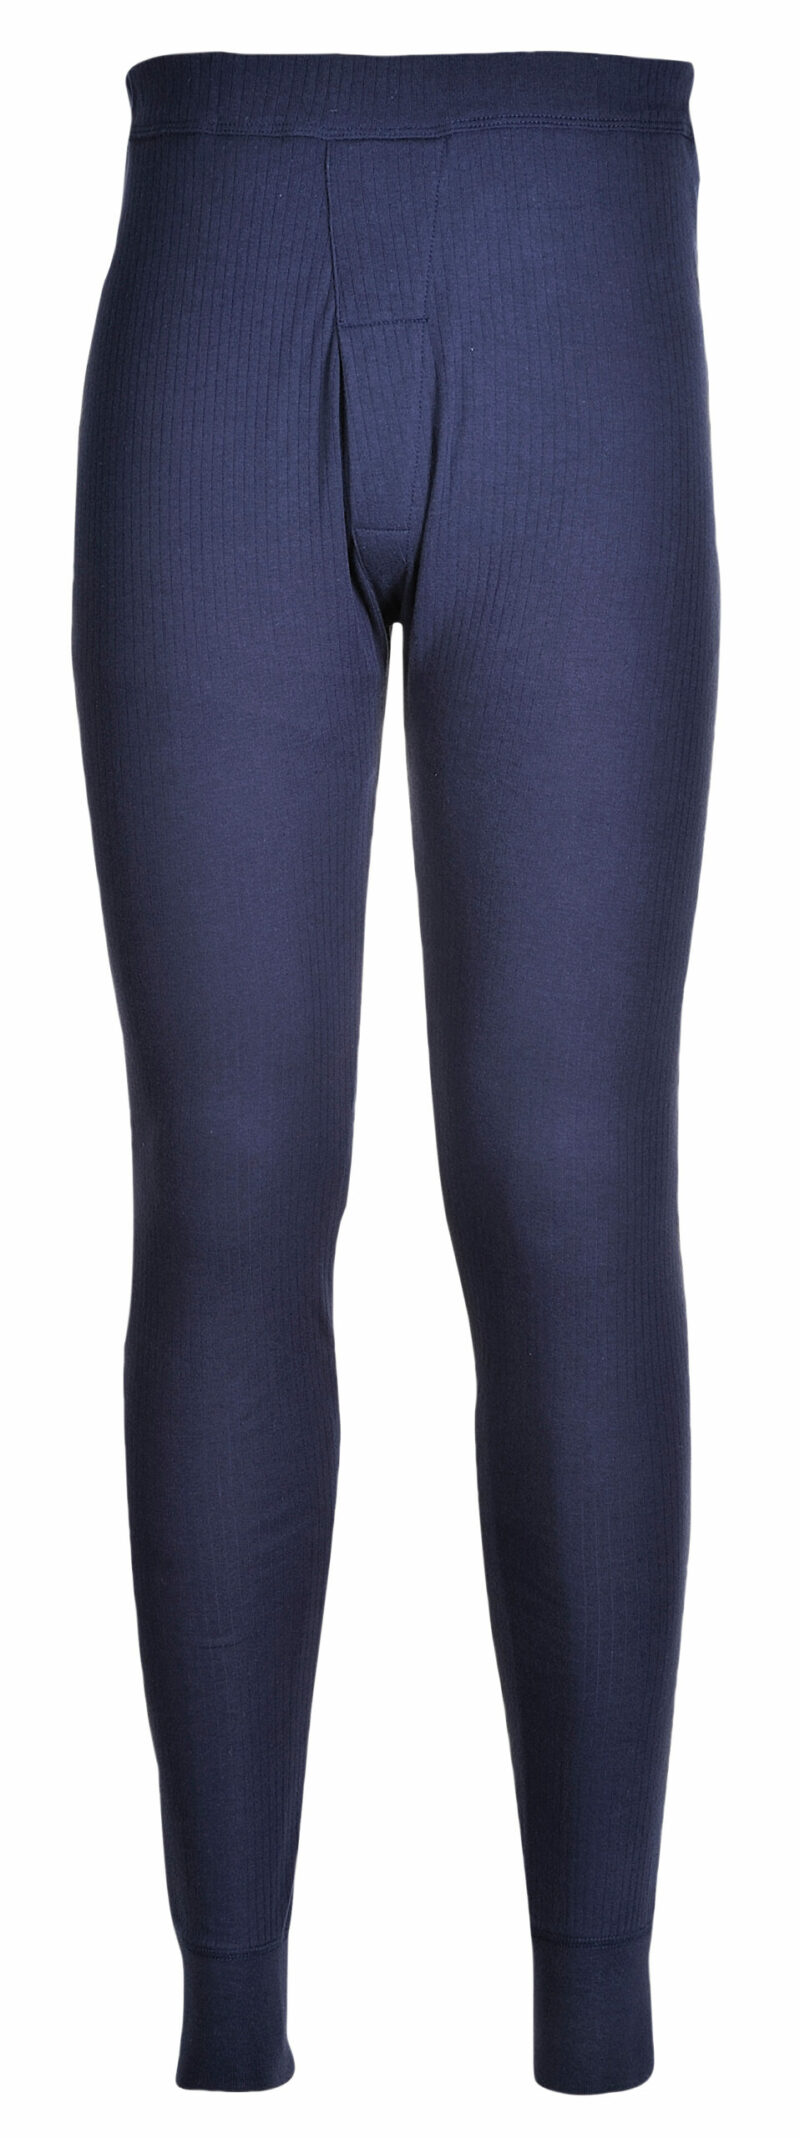 Portwest B121 Thermal Trousers-5950